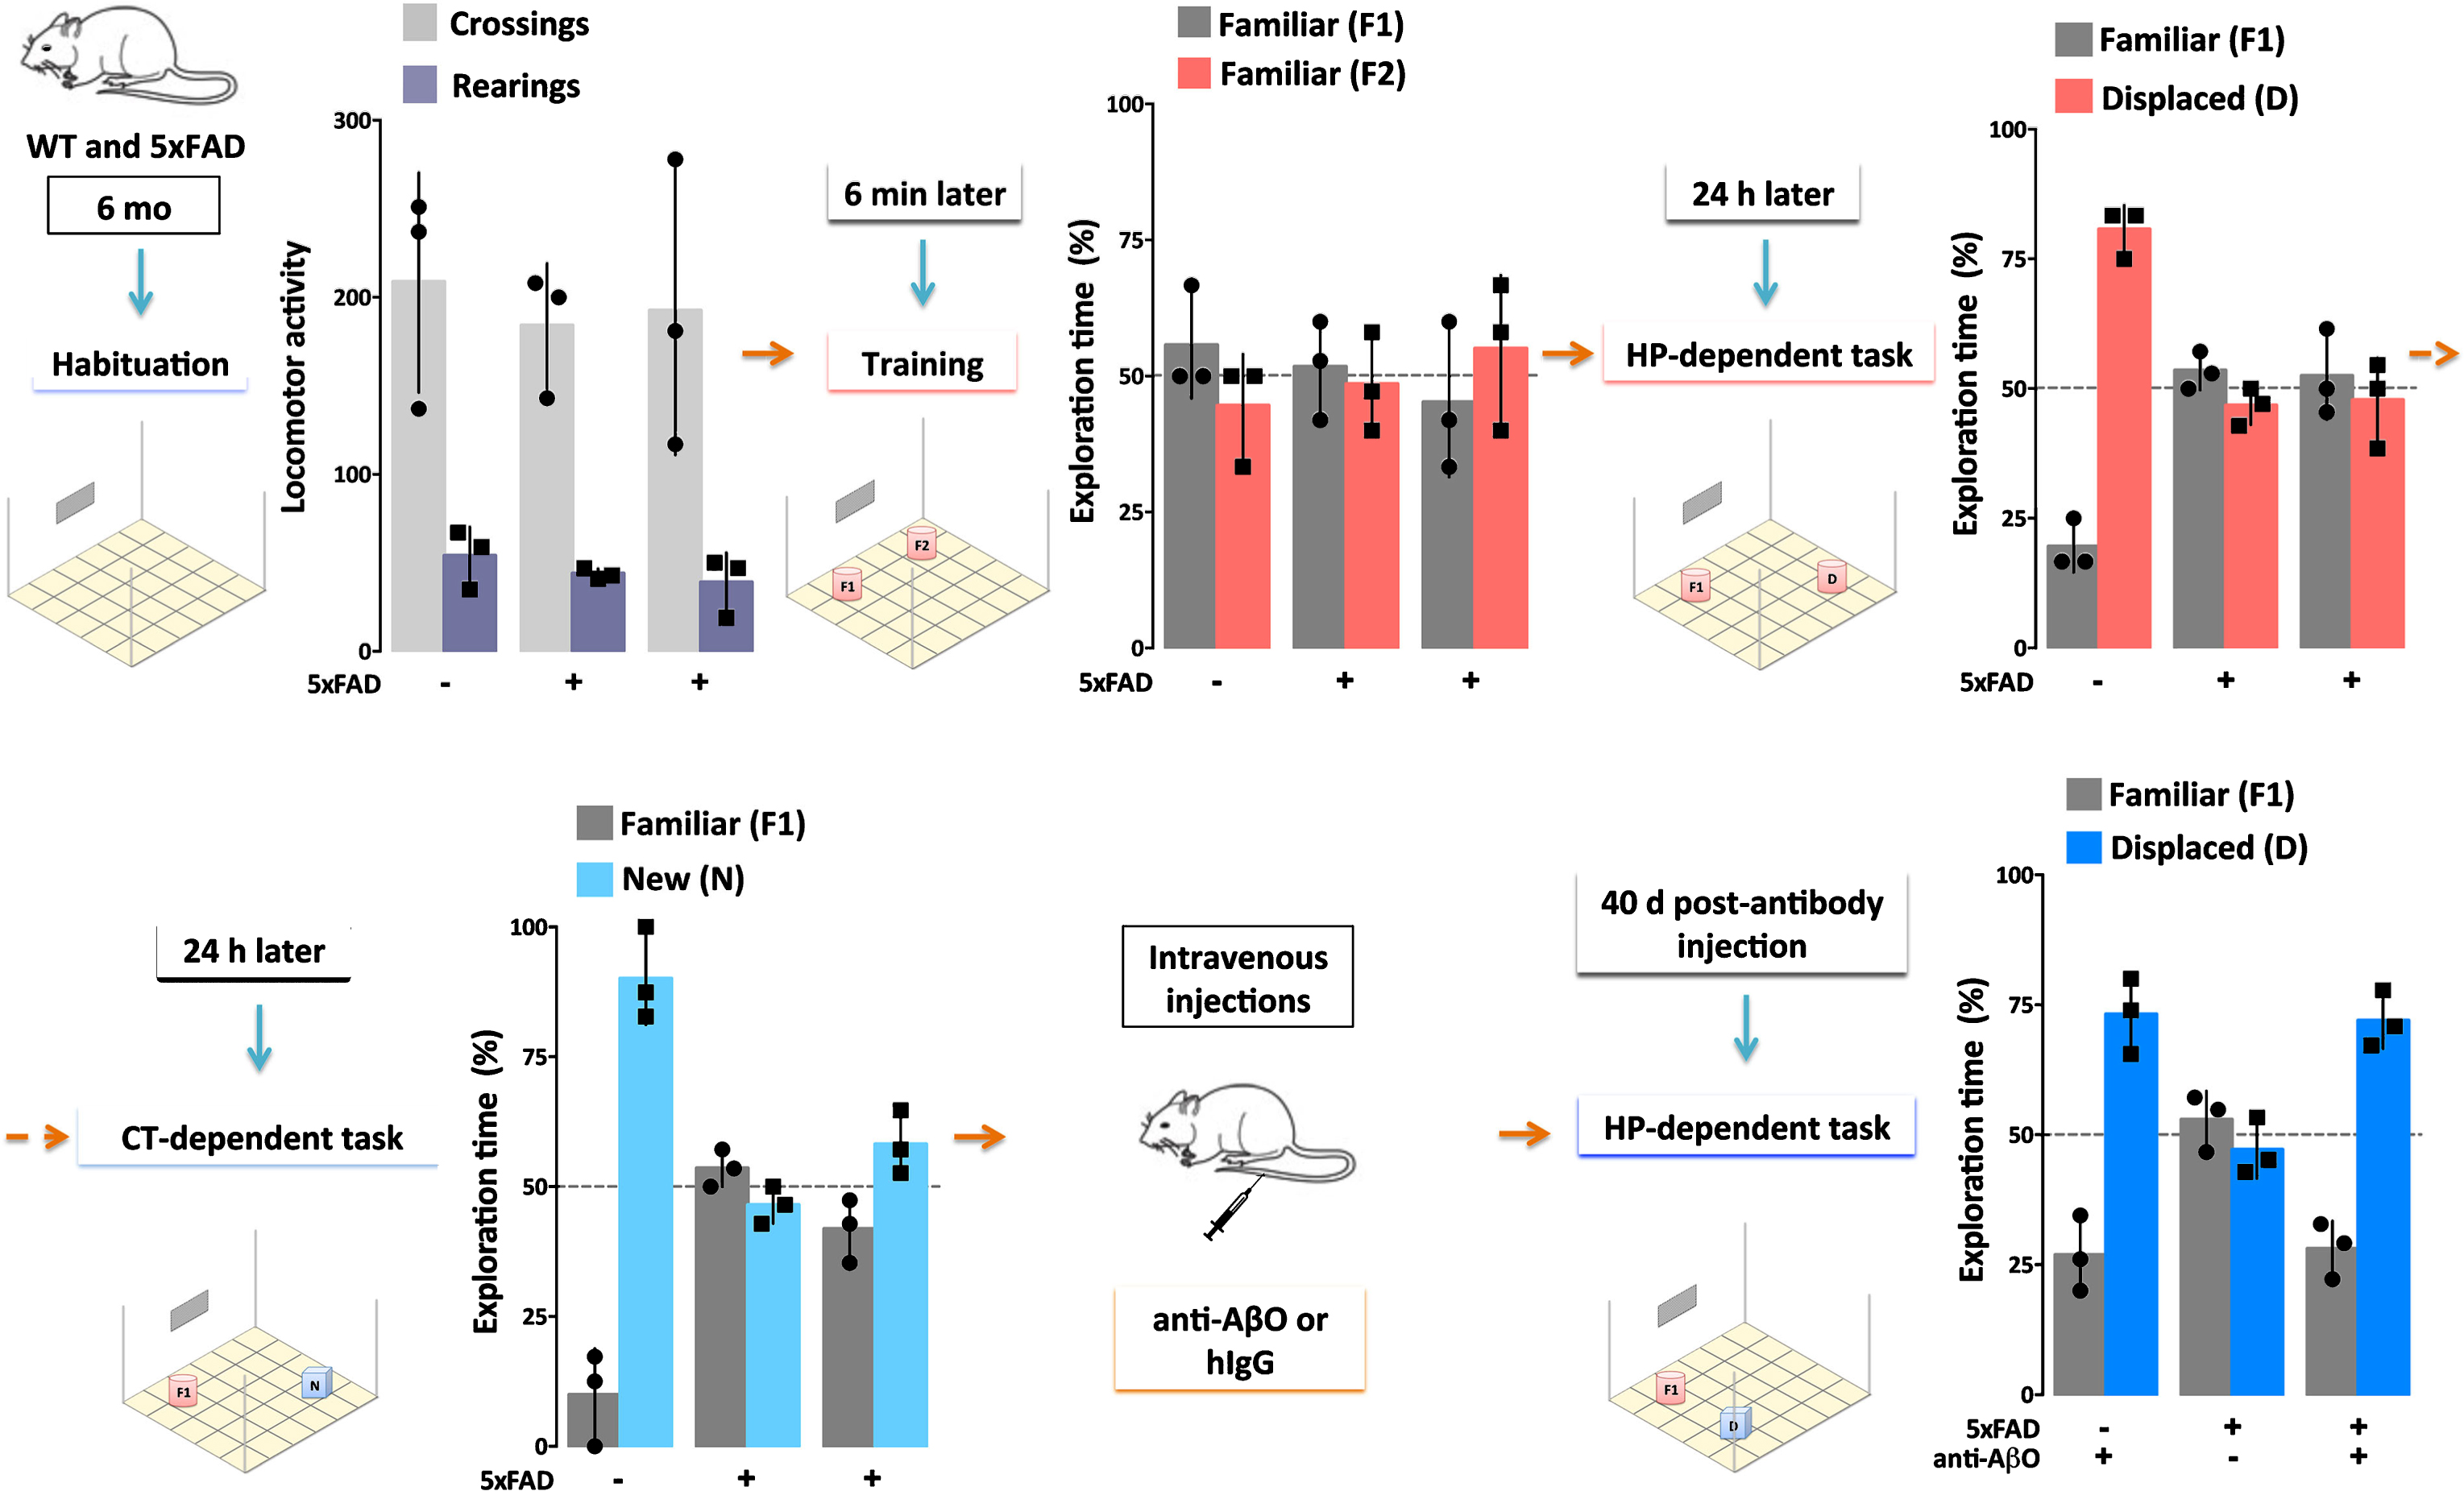 Single injection (30μg) of an AβO-specific antibody ameliorates cognitive deficits in AD mice for at least 40 days. 5xFAD Tg mice and their wild-type (WT) littermates (6 months of age) were evaluated by Object Recognition Tasks before and after (40 days) a single injection (30μg) of a humanized AβO-specific antibody (anti-AβO) or non-specific human IgG (hIgG). First, locomotor activity was assessed while mice were allowed to habituate to the testing field (Habituation). Assessments were the number of times the mice crossed grids in the field (Crossings, light gray) and the number of times mice put their hind paws on the walls of the field (Rearings, purple), with no differences between WT and 5xFAD mice. Next, the test objects (F1 and F2) were introduced to the mice in the Training session. All mice showed normal exploratory behavior, defined by 50% exploration of each object, as both objects are equal and new to the mice. The ability of mice to remember object placement was then tested 24 hours after the Training session in a hippocampal (HP)-dependent task. Another 24 hours later, the ability of mice to remember the object was tested in a cortical (CT)-dependent task. Only the WT mice were able to recognize the familiar object (F1) from the Training session, as evidenced by >50% exploration of the displaced (D, pink) or new (N, light blue) object. The 5xFAD mice failed to recognize F1 in both tasks. When re-evaluated 40 days post-antibody injection in a HP-dependent task, only the 5xFAD mice that received the AβO antibody recovered their ability to recognize object F1. These data support the hypothesis that AβOs induce memory dysfunction in AD (Bicca and Klein, unpublished).